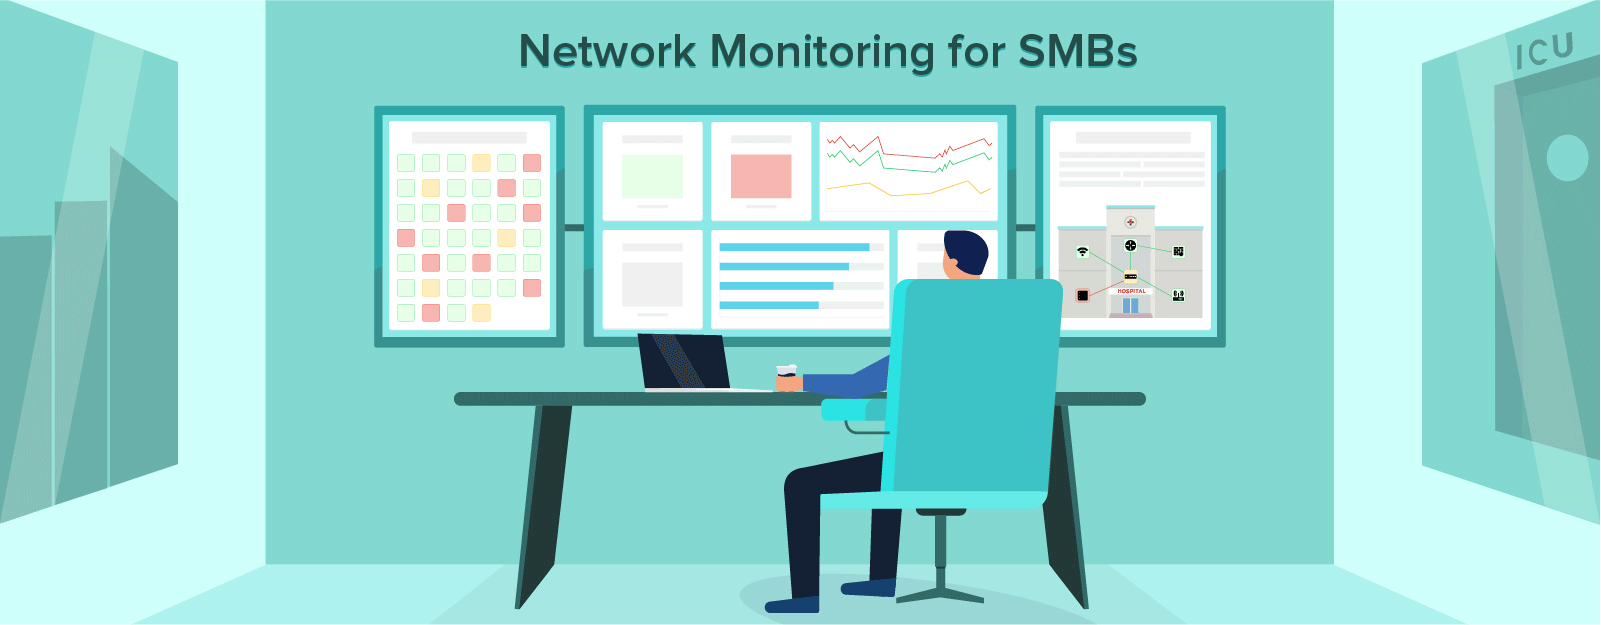 Why SMBs need network monitoring